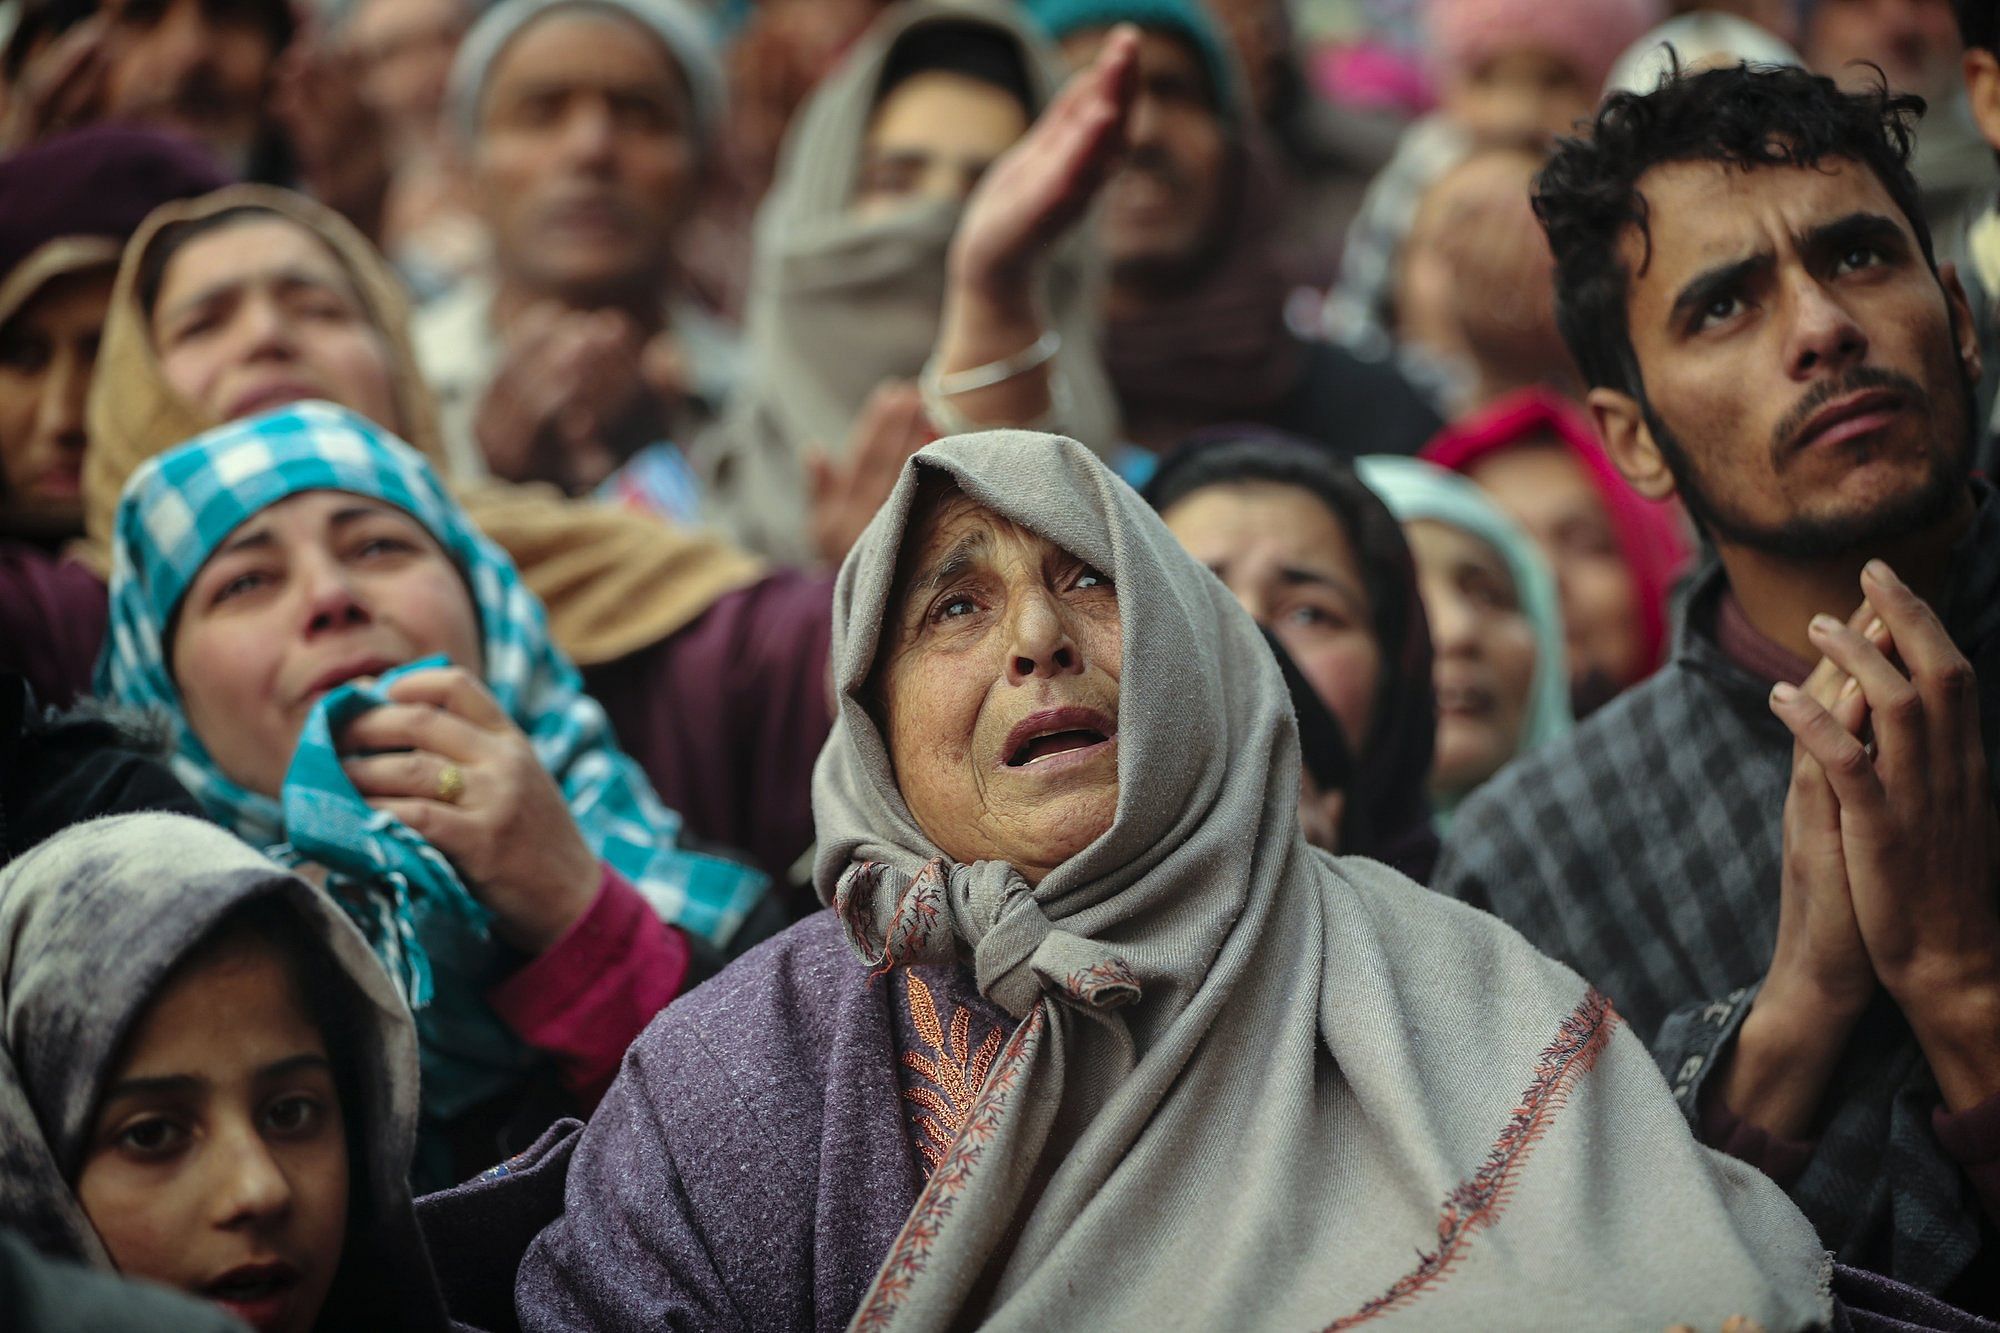 Kashmiri Muslim devotees offer prayer outside the shrine of Sufi saint Sheikh Syed Abdul Qadir Jeelani in Srinagar, Indian controlled Kashmir, Dec. 9, 2019. Hundreds of devotees gathered at the shrine for the 11-day festival that marks the death anniversary of the Sufi saint. The image was part of a series of photographs by Associated Press photographers which won the 2020 Pulitzer Prize for Feature Photography. (AP Photo/Mukhtar Khan)